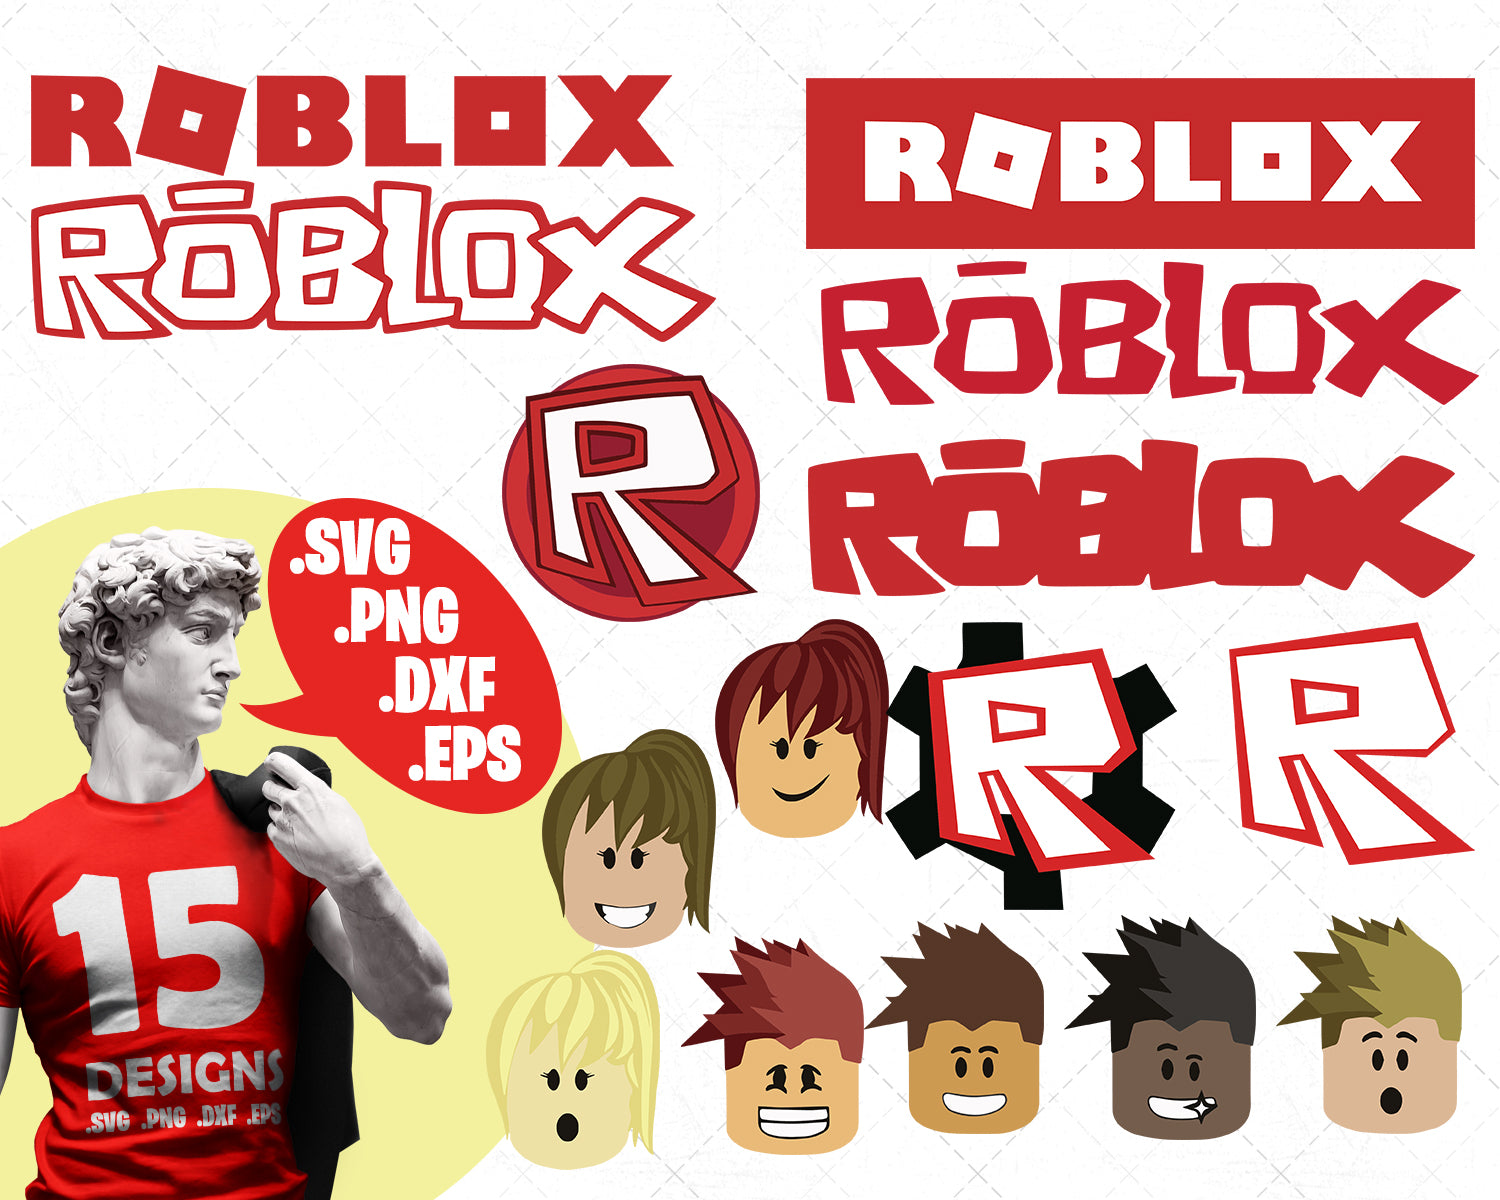 Roblox Svg Roblox Alphabet Svg Roblox Font Svg Roblox Letter Roblo Svg Designs For Cutting And Printing - roblox character boy svg